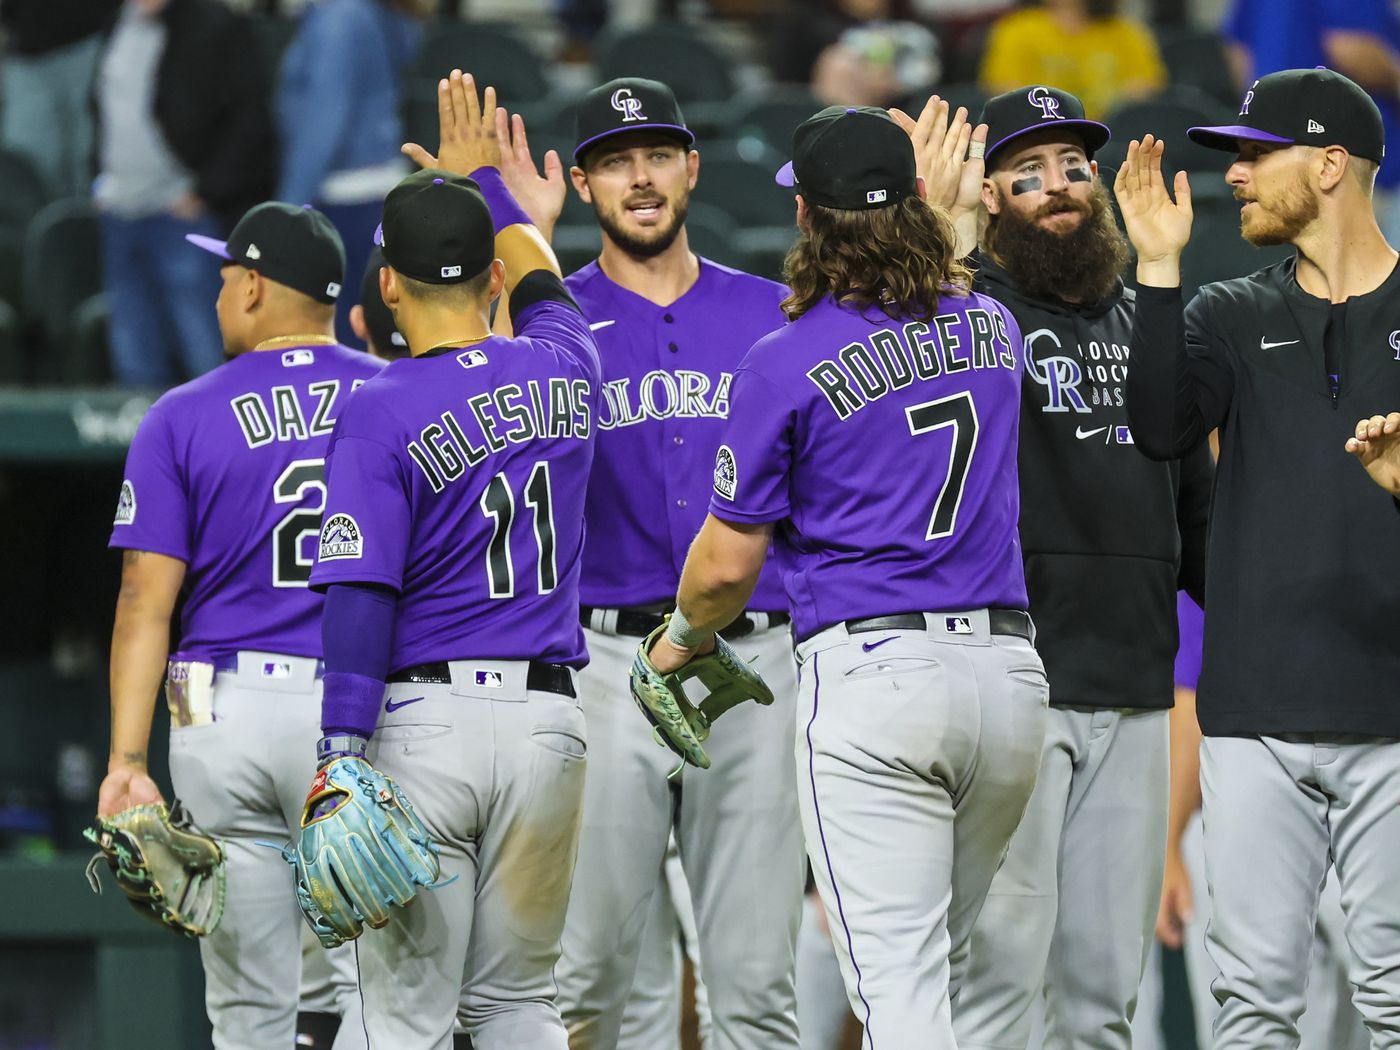 12 Facts About Colorado Rockies - Facts.net